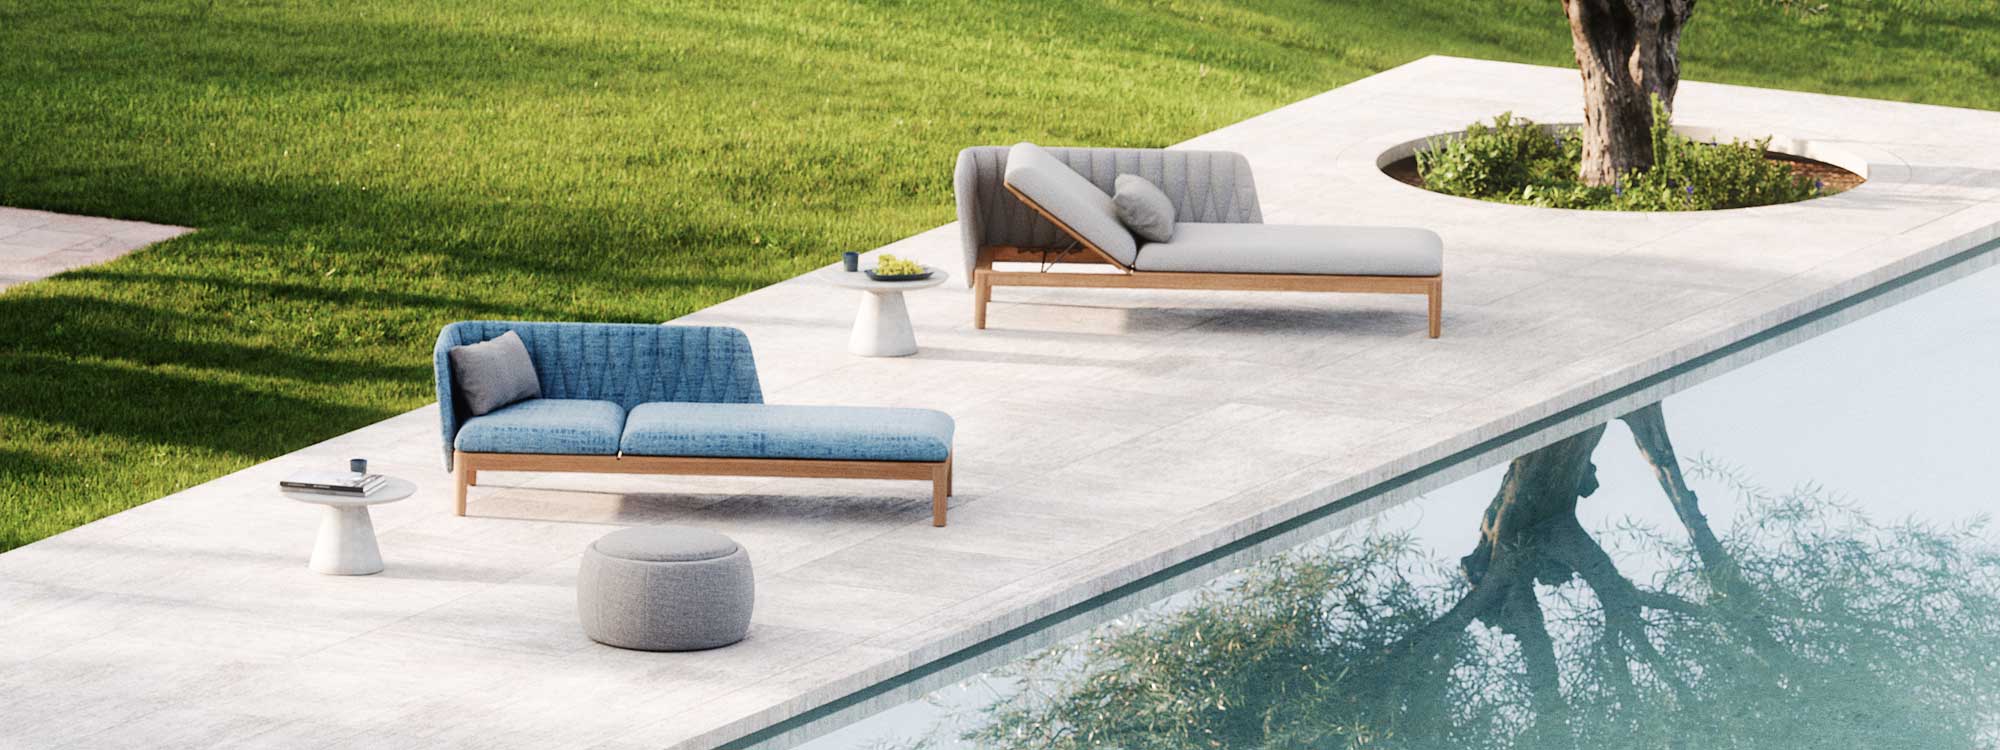 Image of Royal Botania Calpyso daybeds and Conix side tables next to a swimming pool